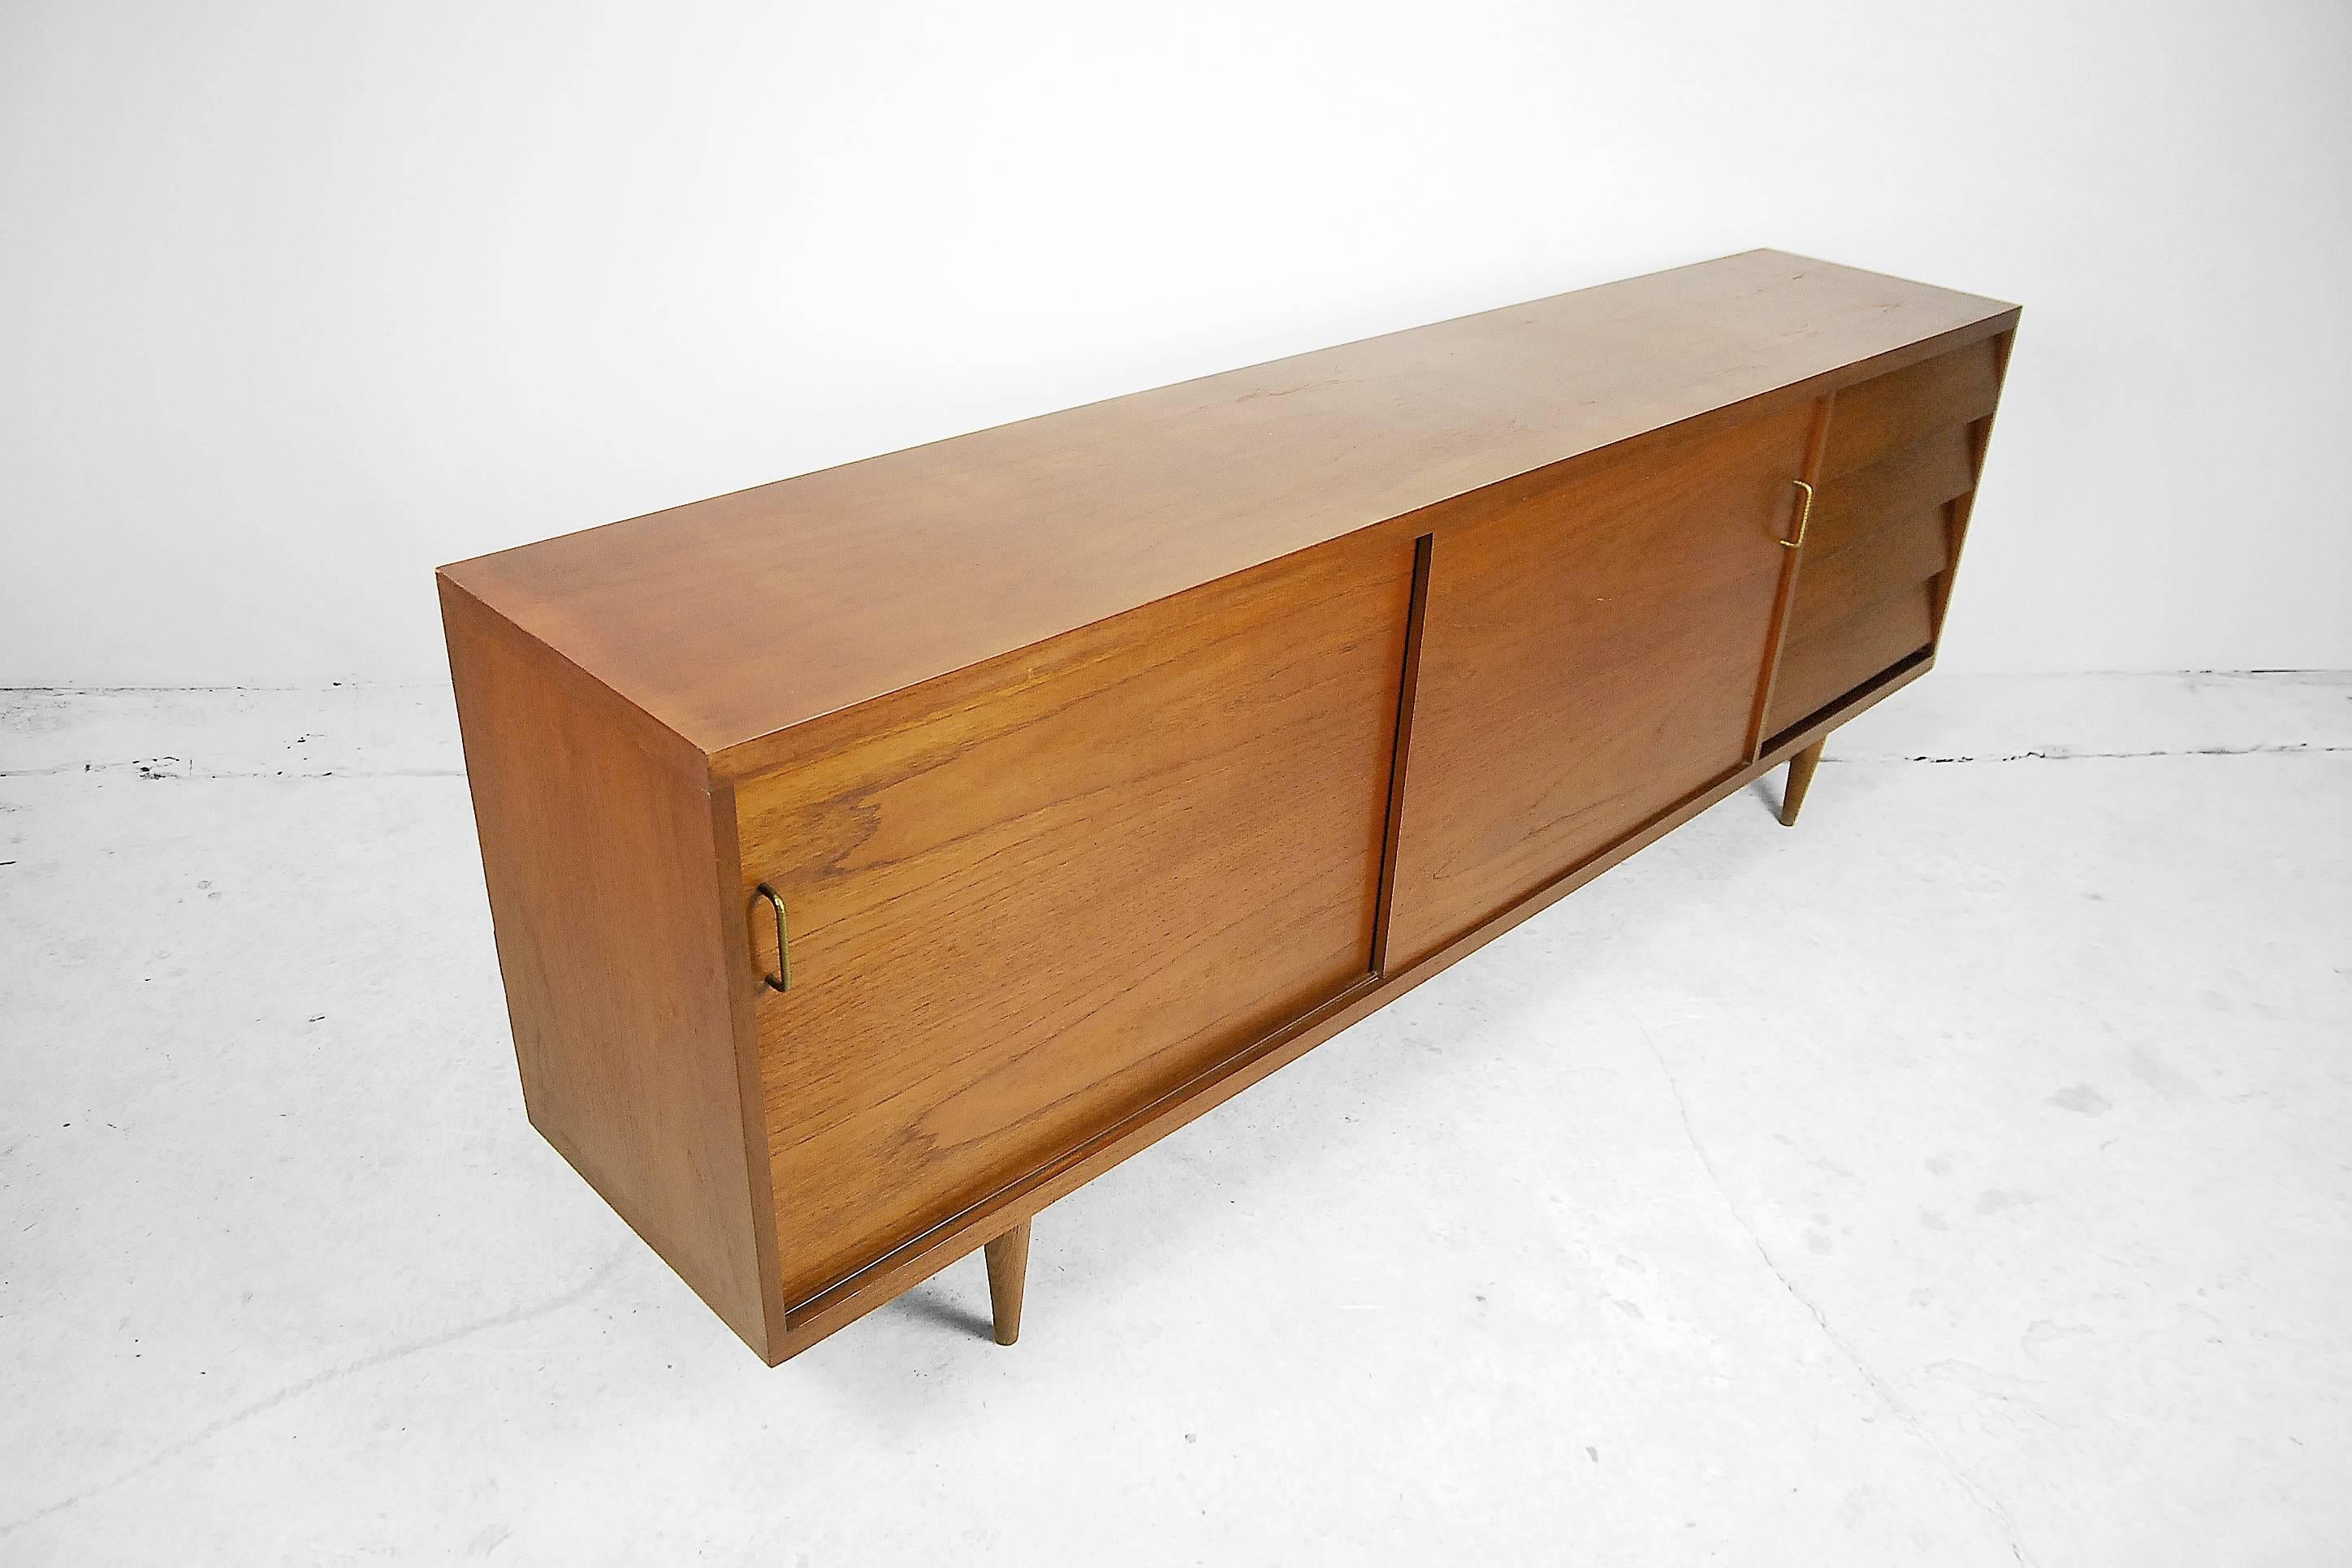 This long sideboard was manufactured in Denmark, during the 1960s. It is made from solid teak and teak veneer with a strong grain. It has a two sliding doors and four drawers.